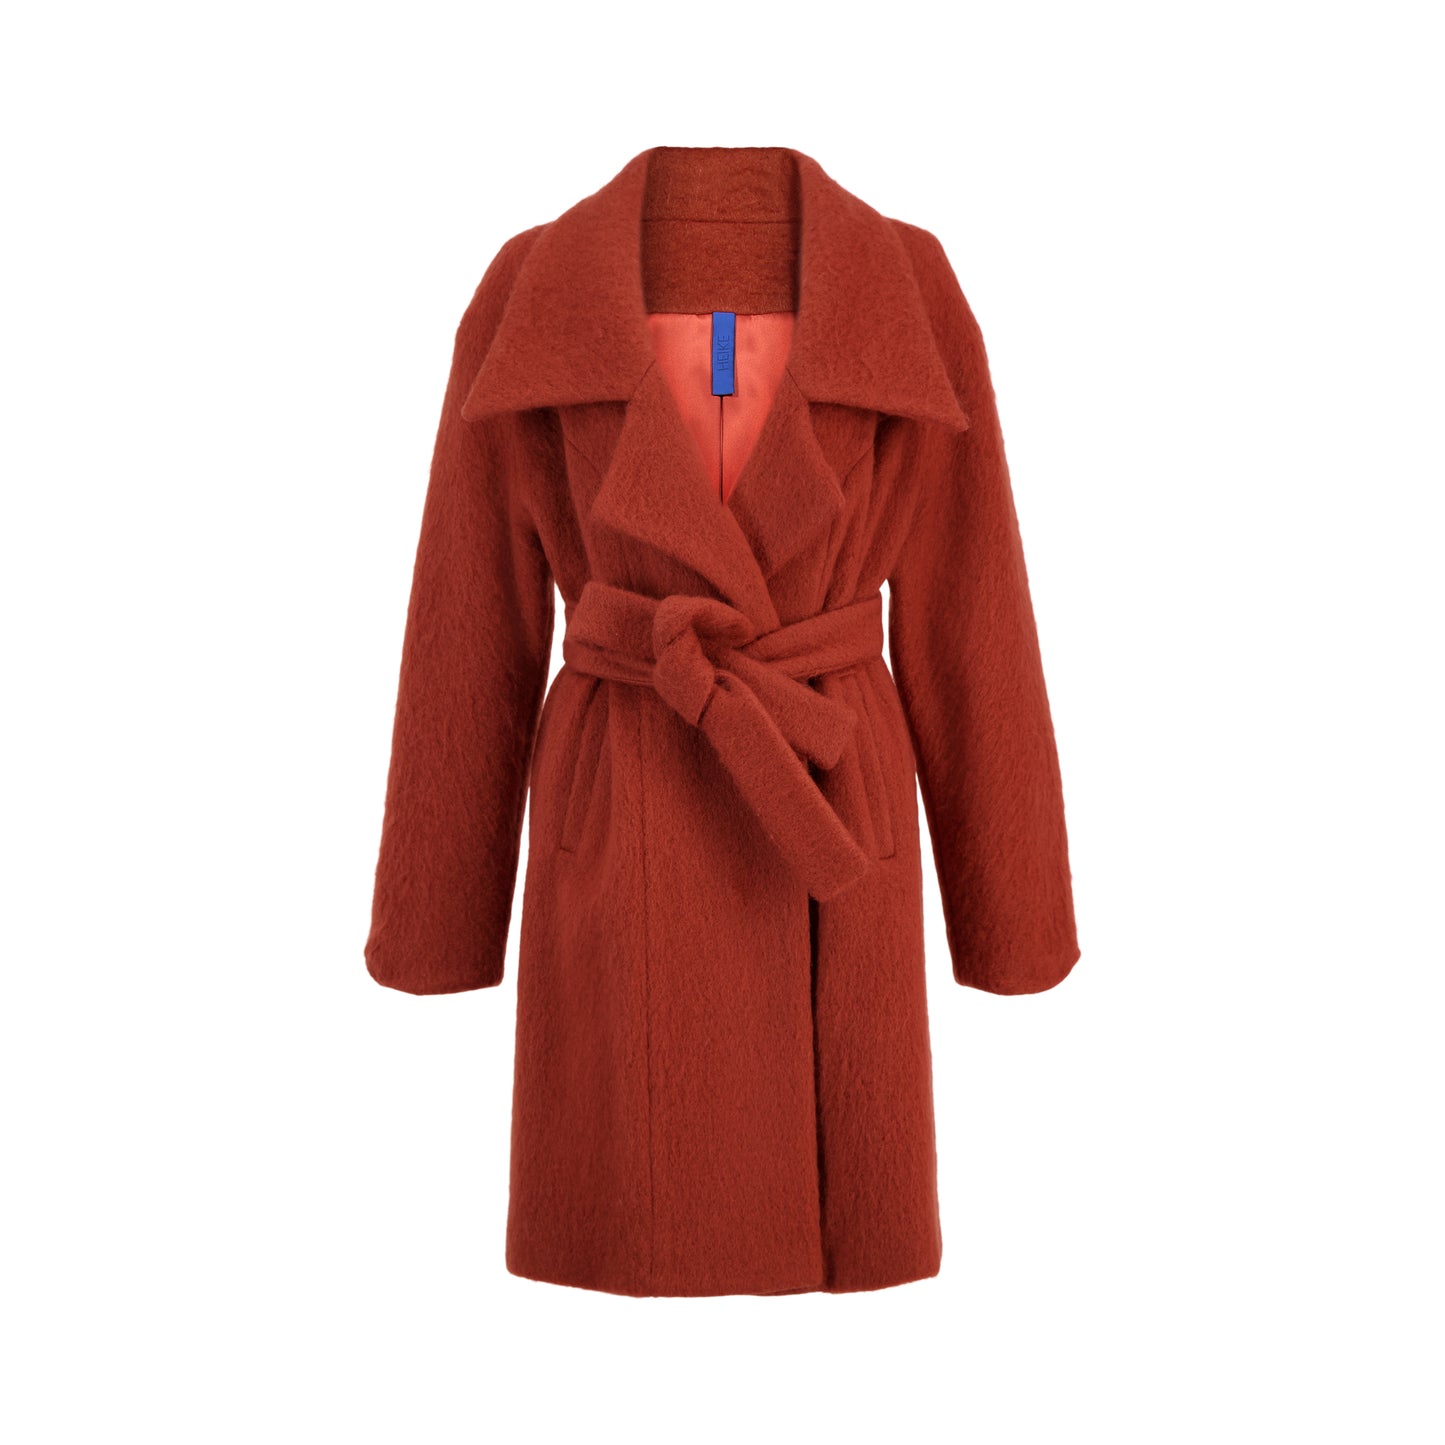 Mohair double breasted coat with wide collar cut and double self tie belt in rust